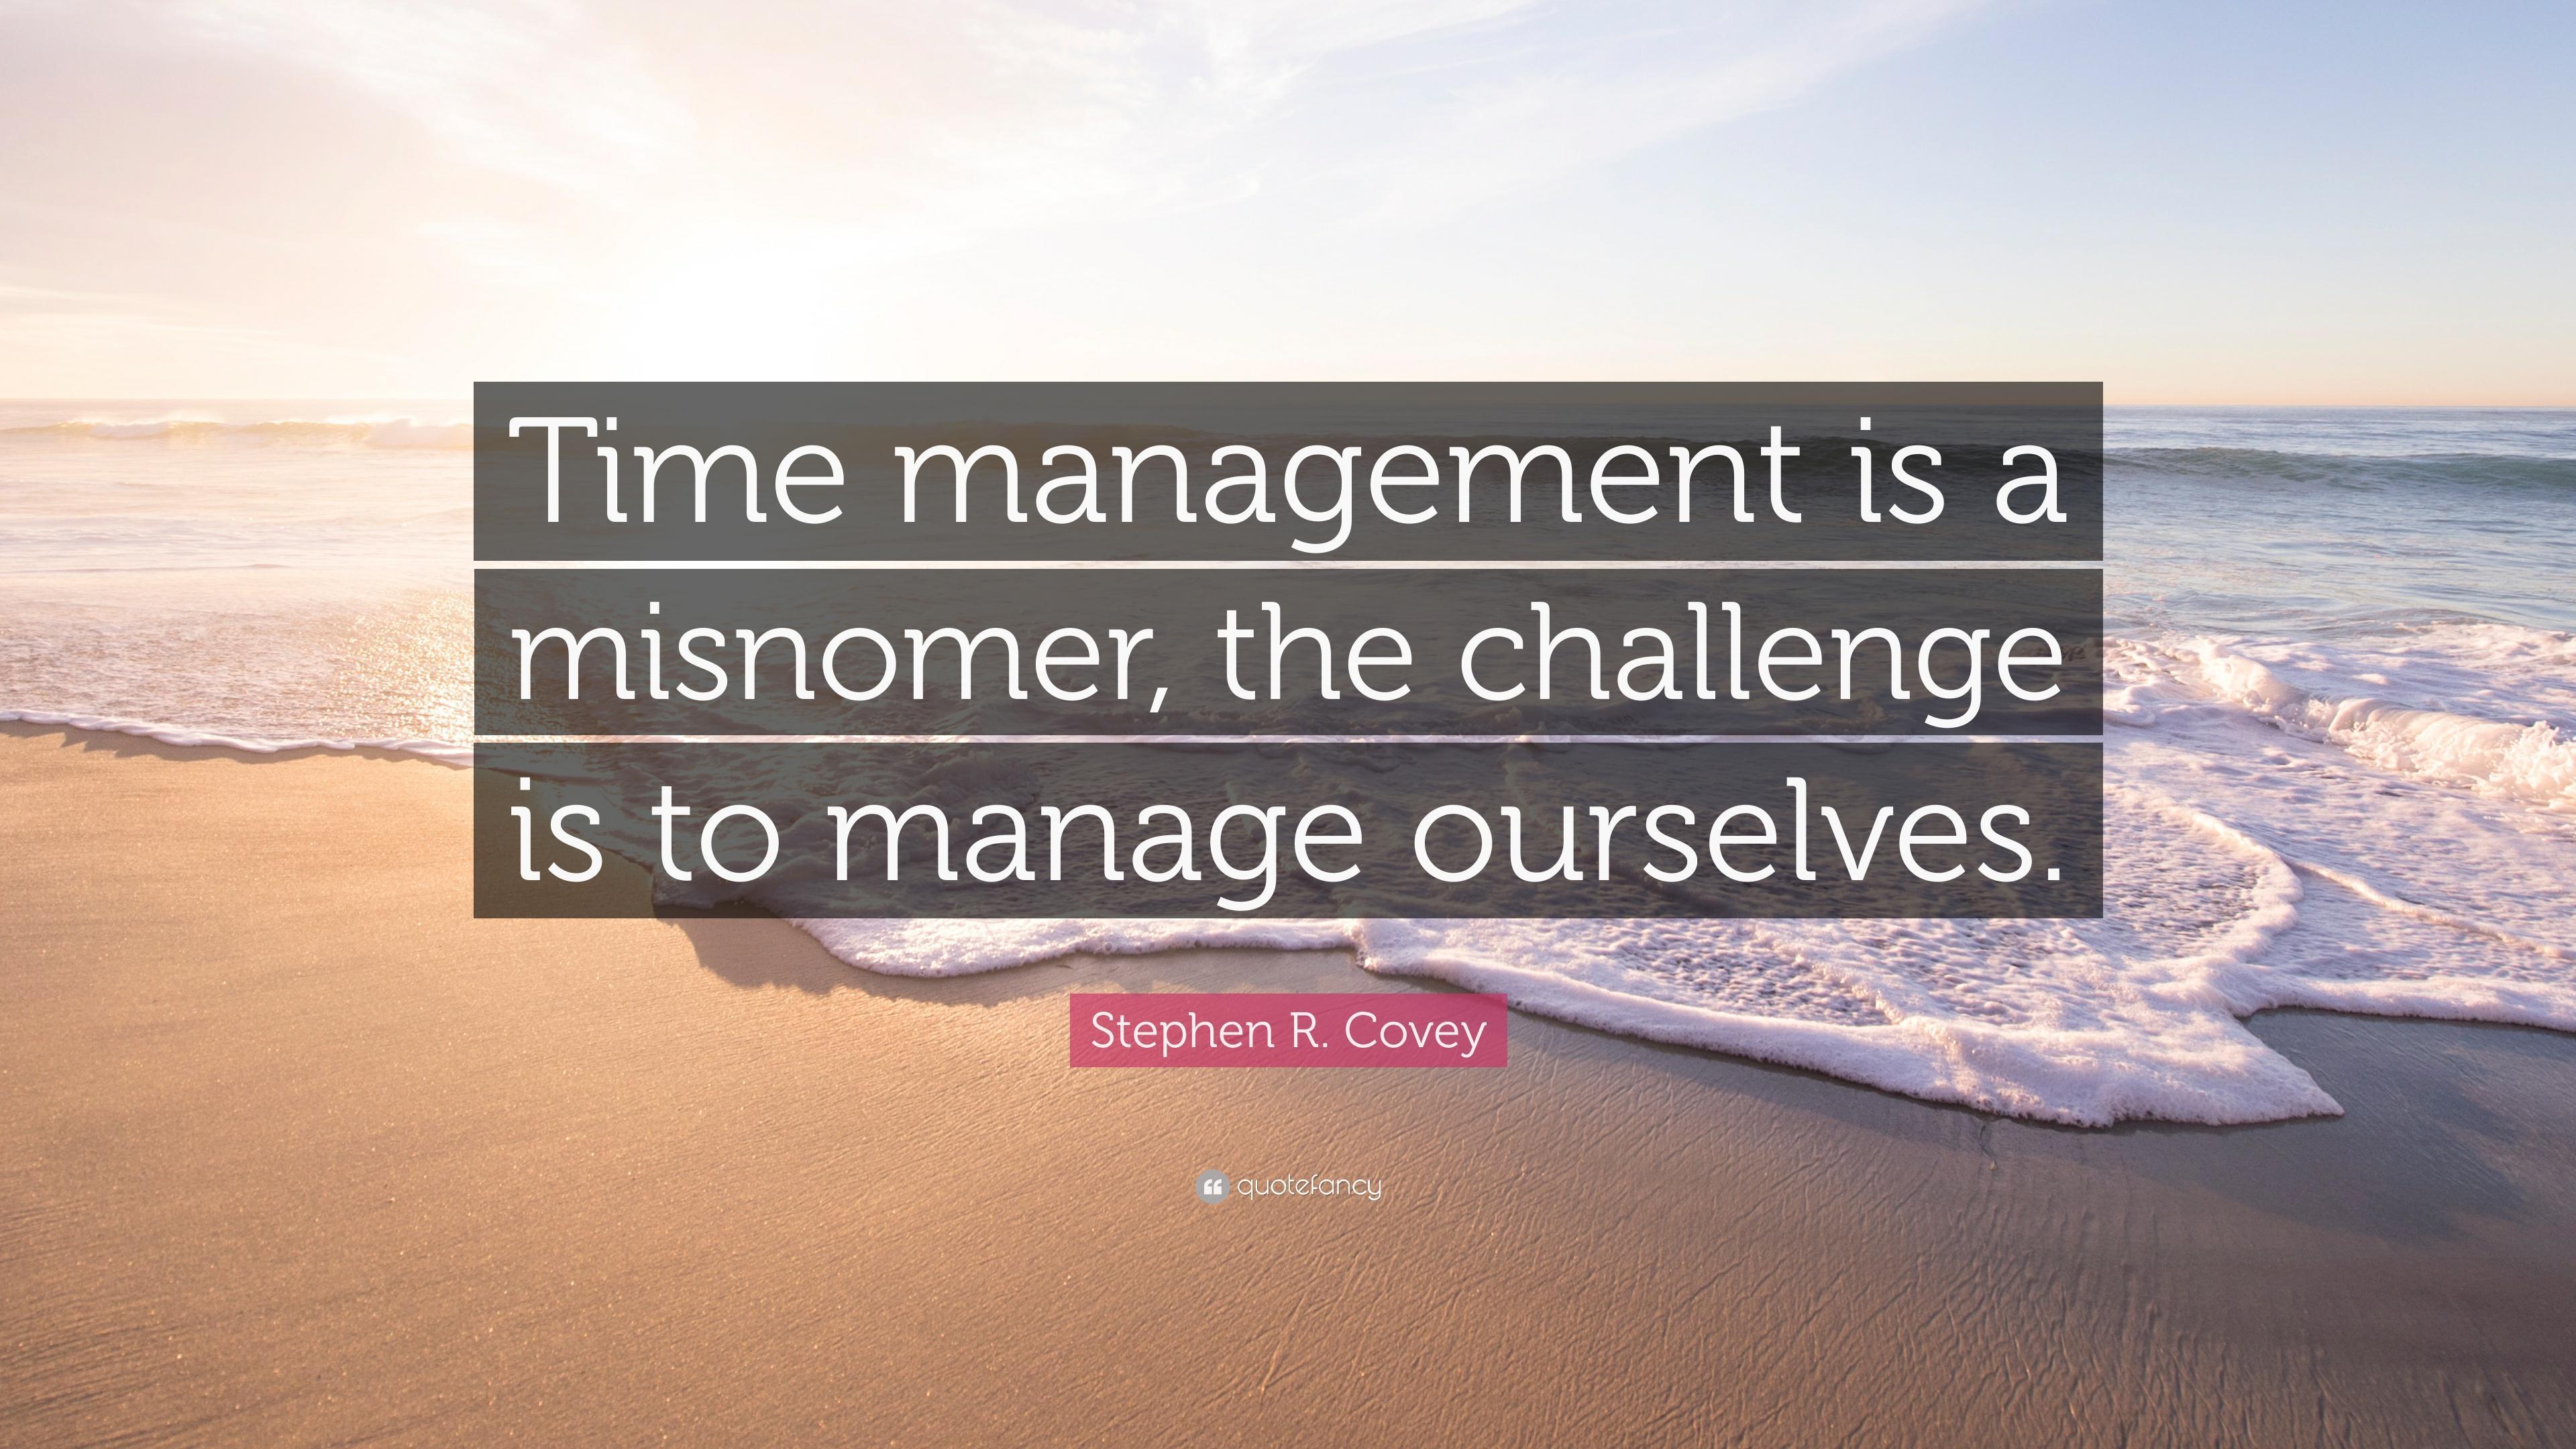 Stephen R. Covey Quote: “Time management is a misnomer